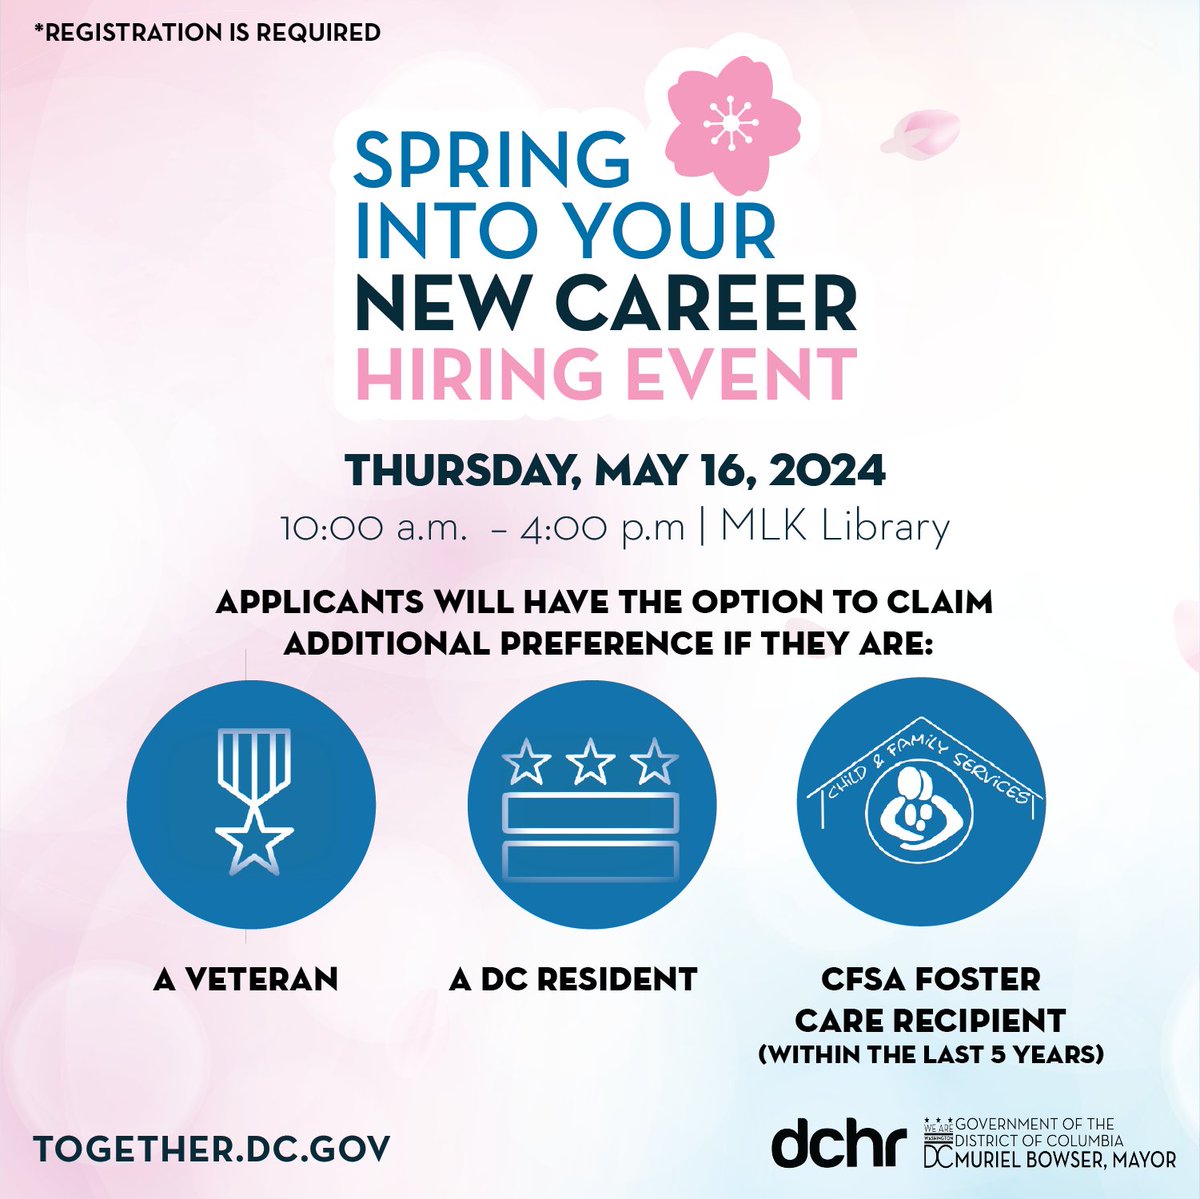 #DidYouKnow that residents in #DC receive preference for #DCGovCareers?  #Veterans and @DCCFSA foster care recipients too! #DCIsHiring ! Register for the hiring fair today! dchr.dc.gov